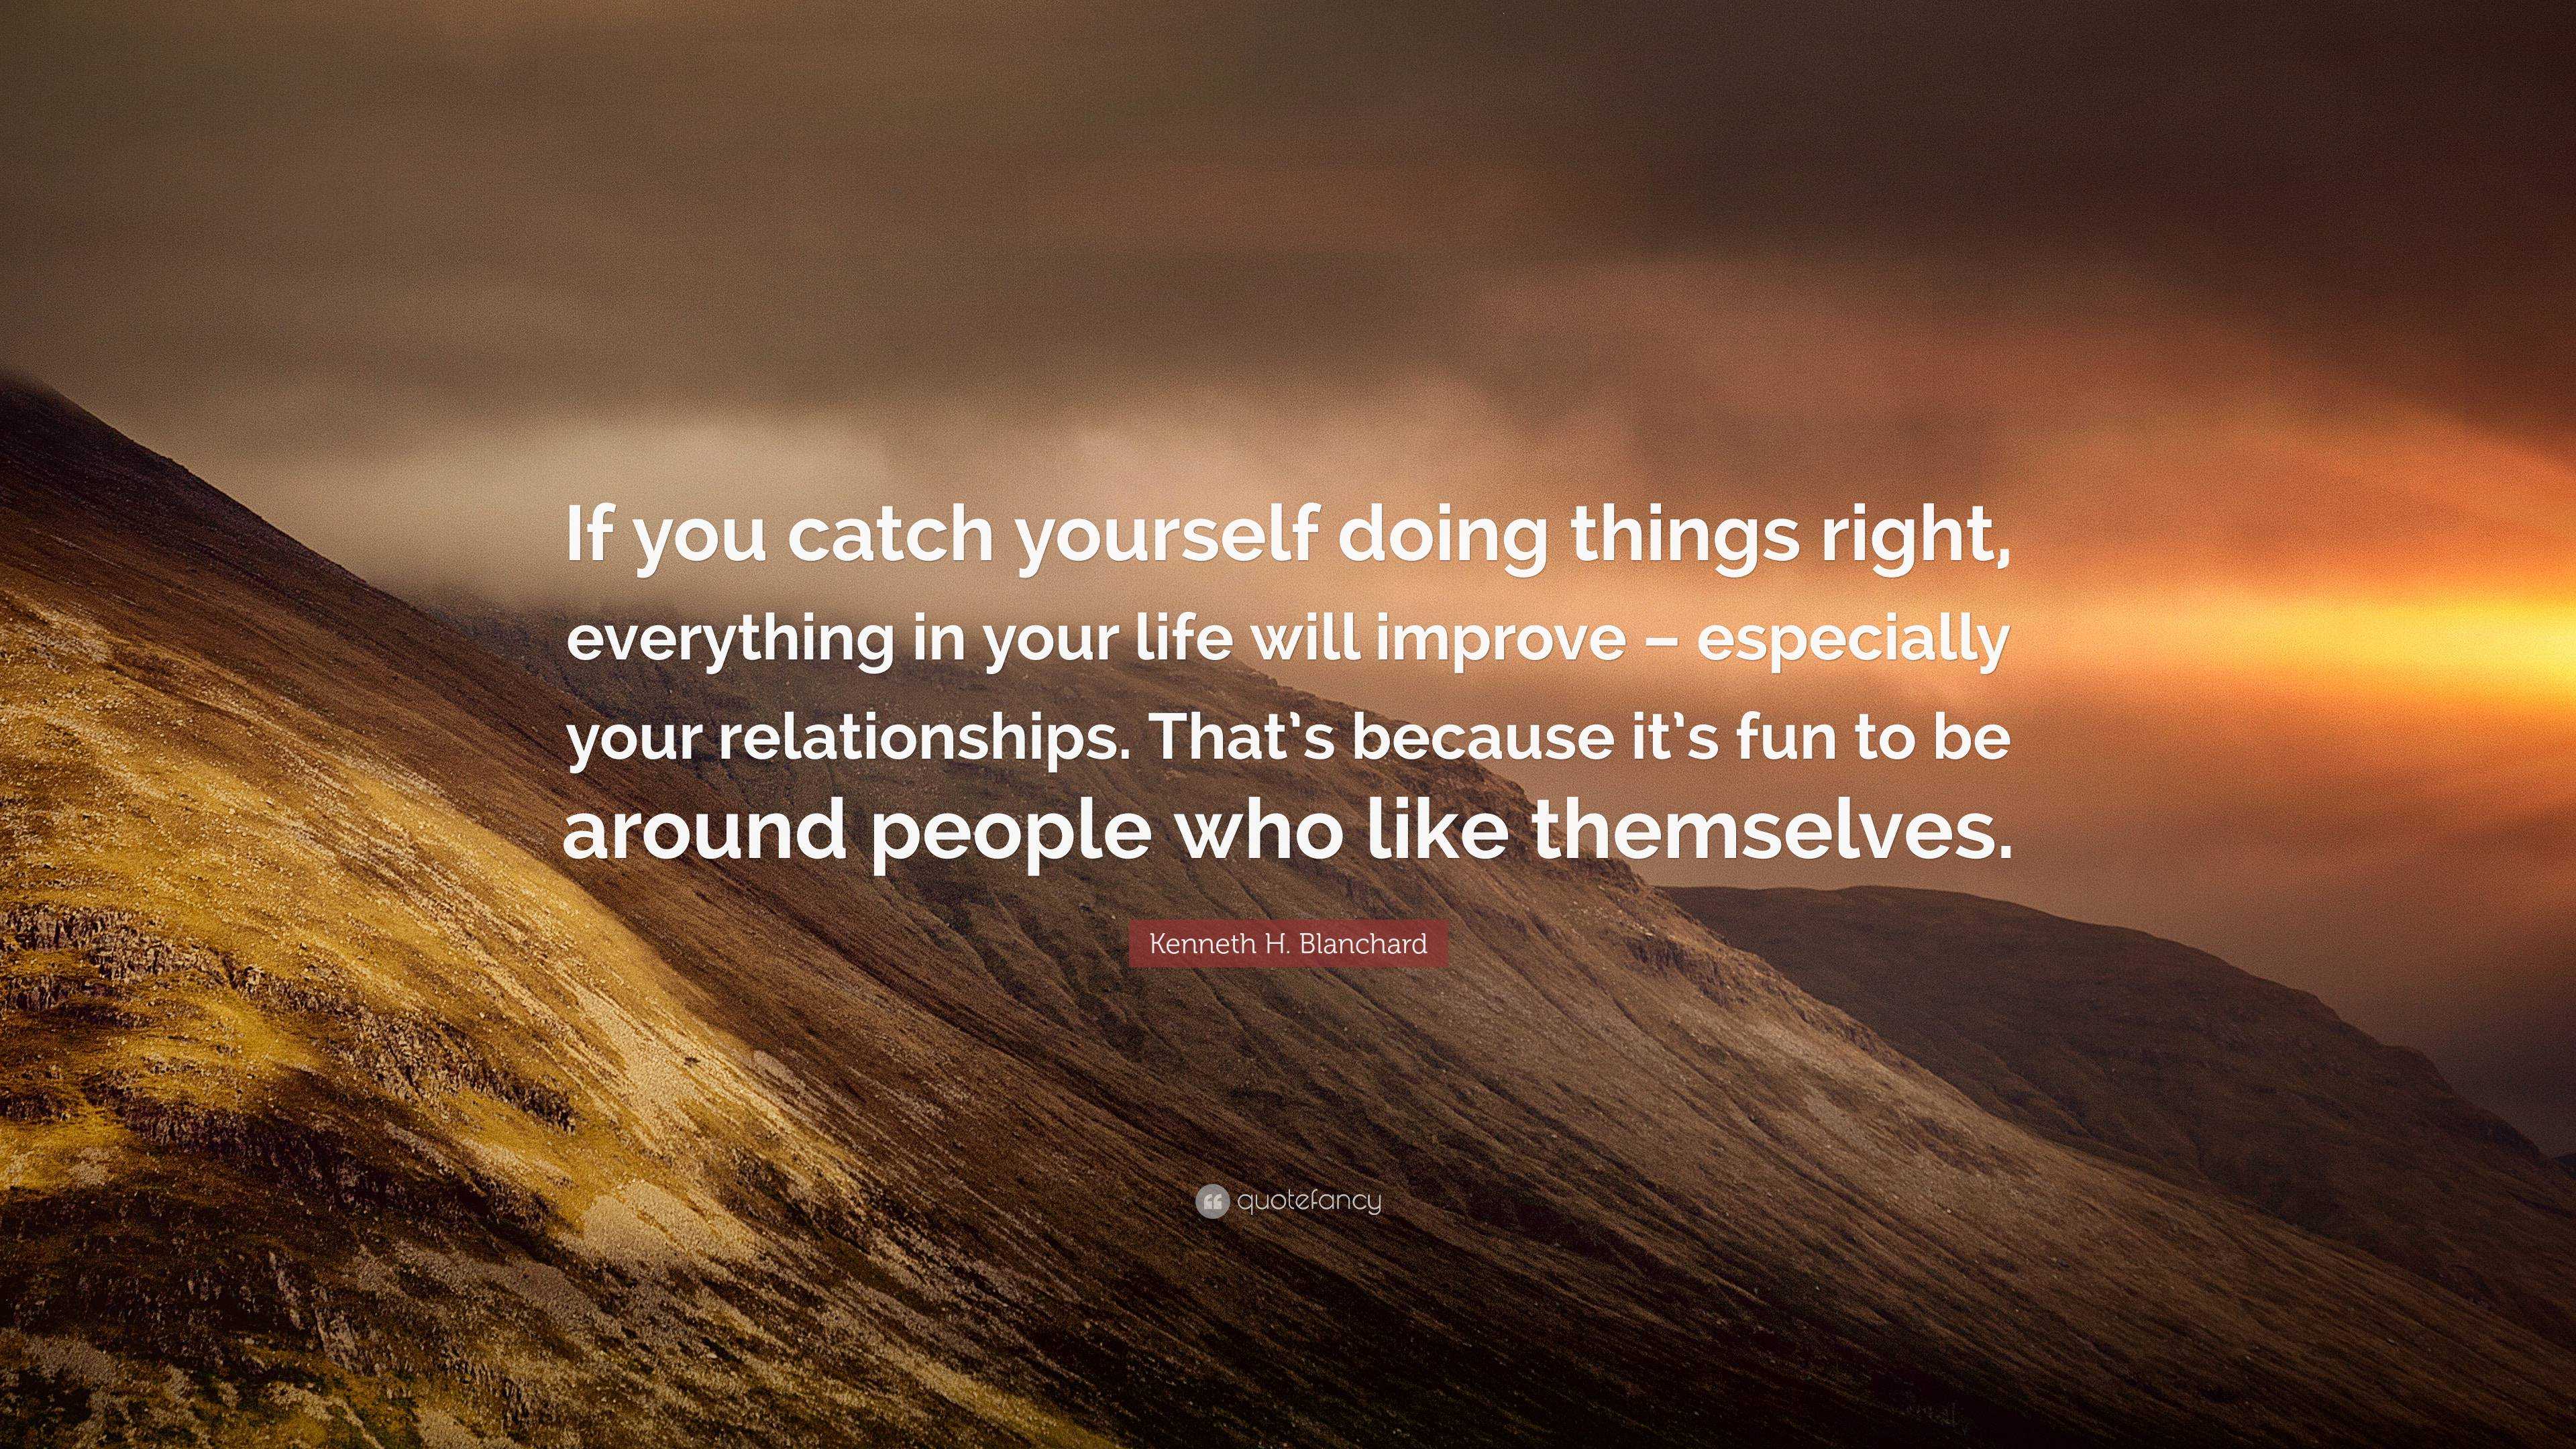 https://quotefancy.com/media/wallpaper/3840x2160/7007672-Kenneth-H-Blanchard-Quote-If-you-catch-yourself-doing-things-right.jpg